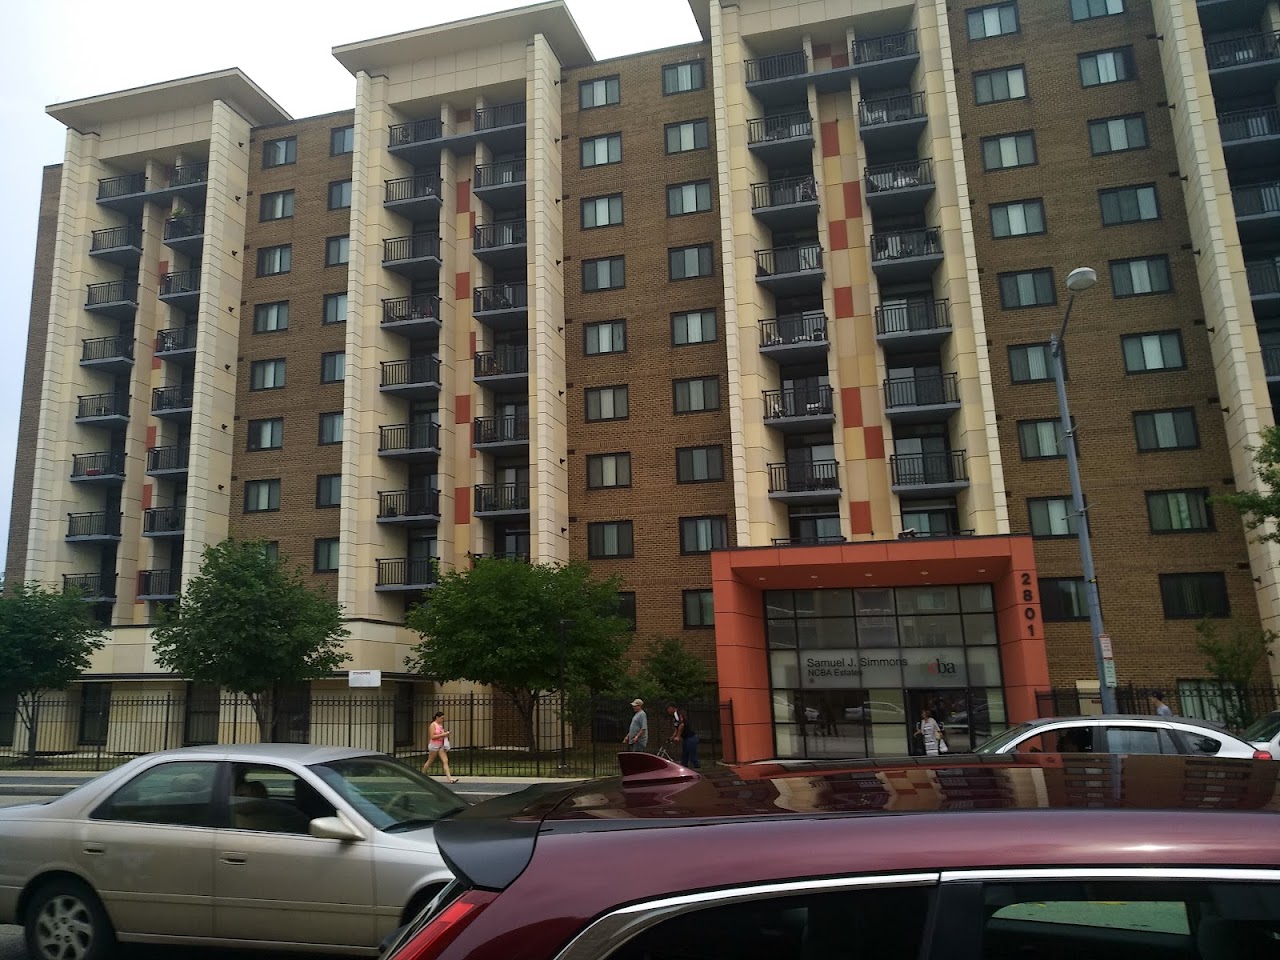 Photo of SAMUEL J SIMMONS NCBA ESTATES. Affordable housing located at 2801 14TH ST NW WASHINGTON, DC 20009